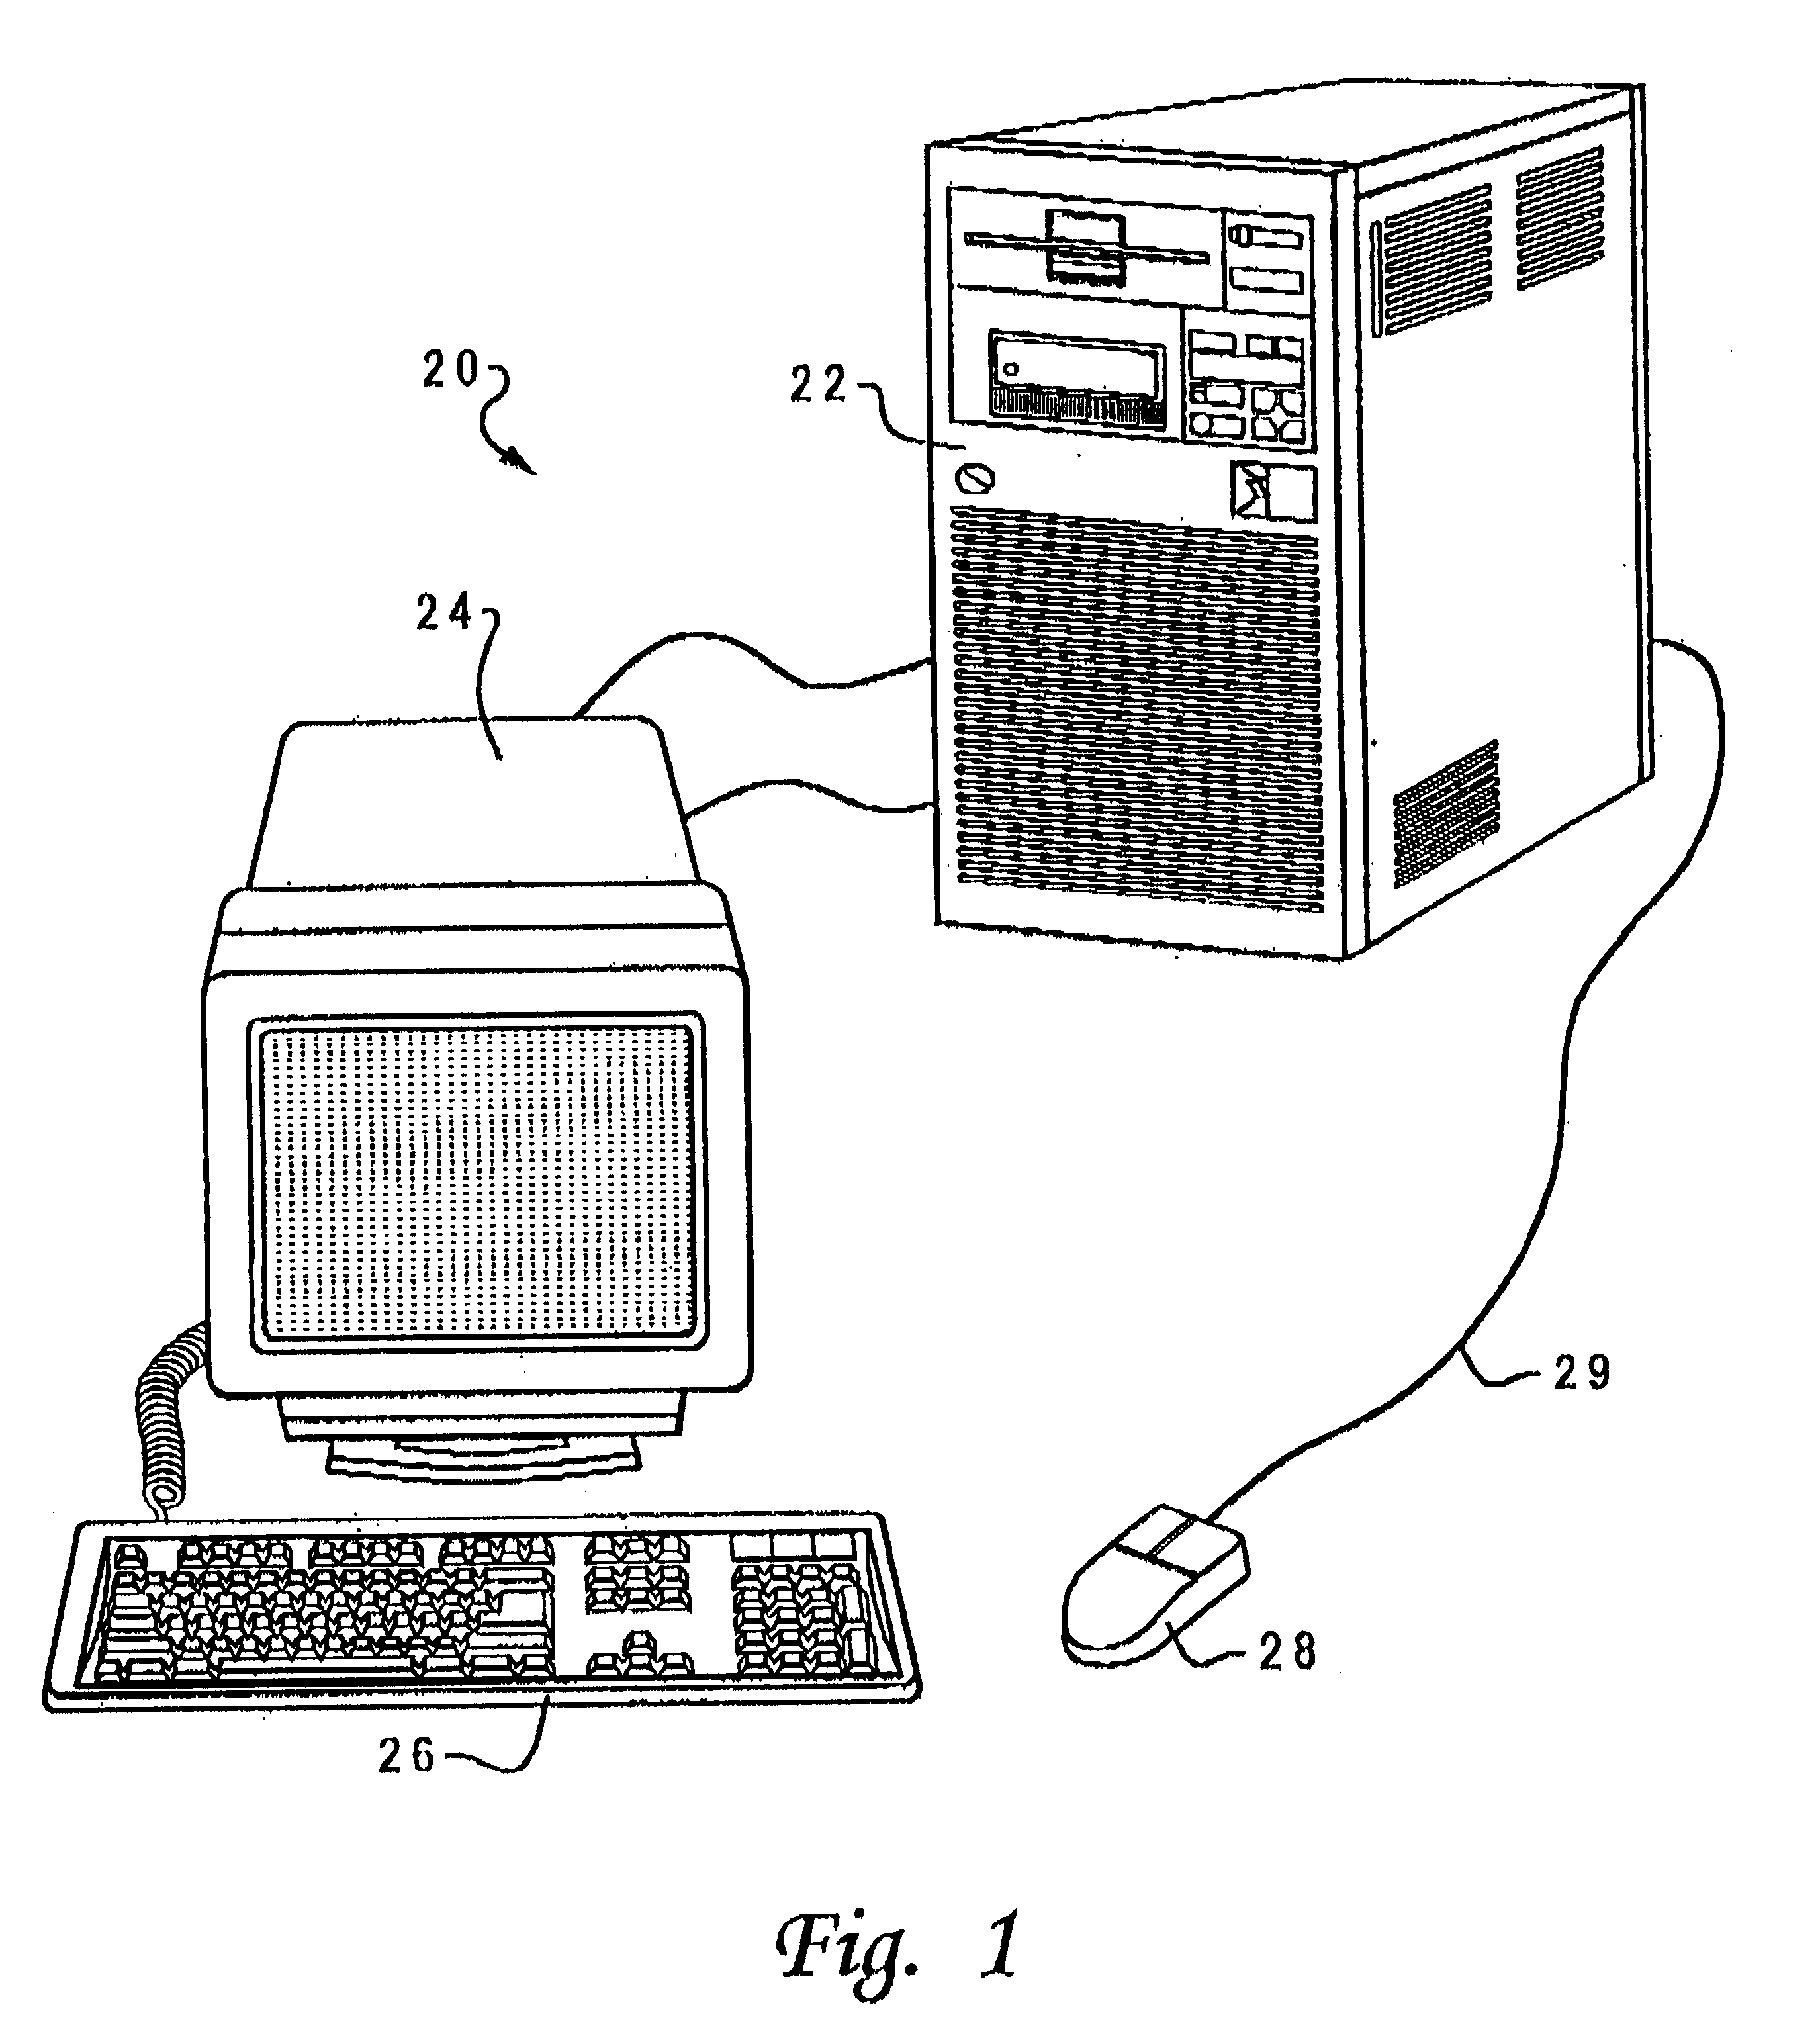 Method and system for dynamically selecting video controllers present within a computer system